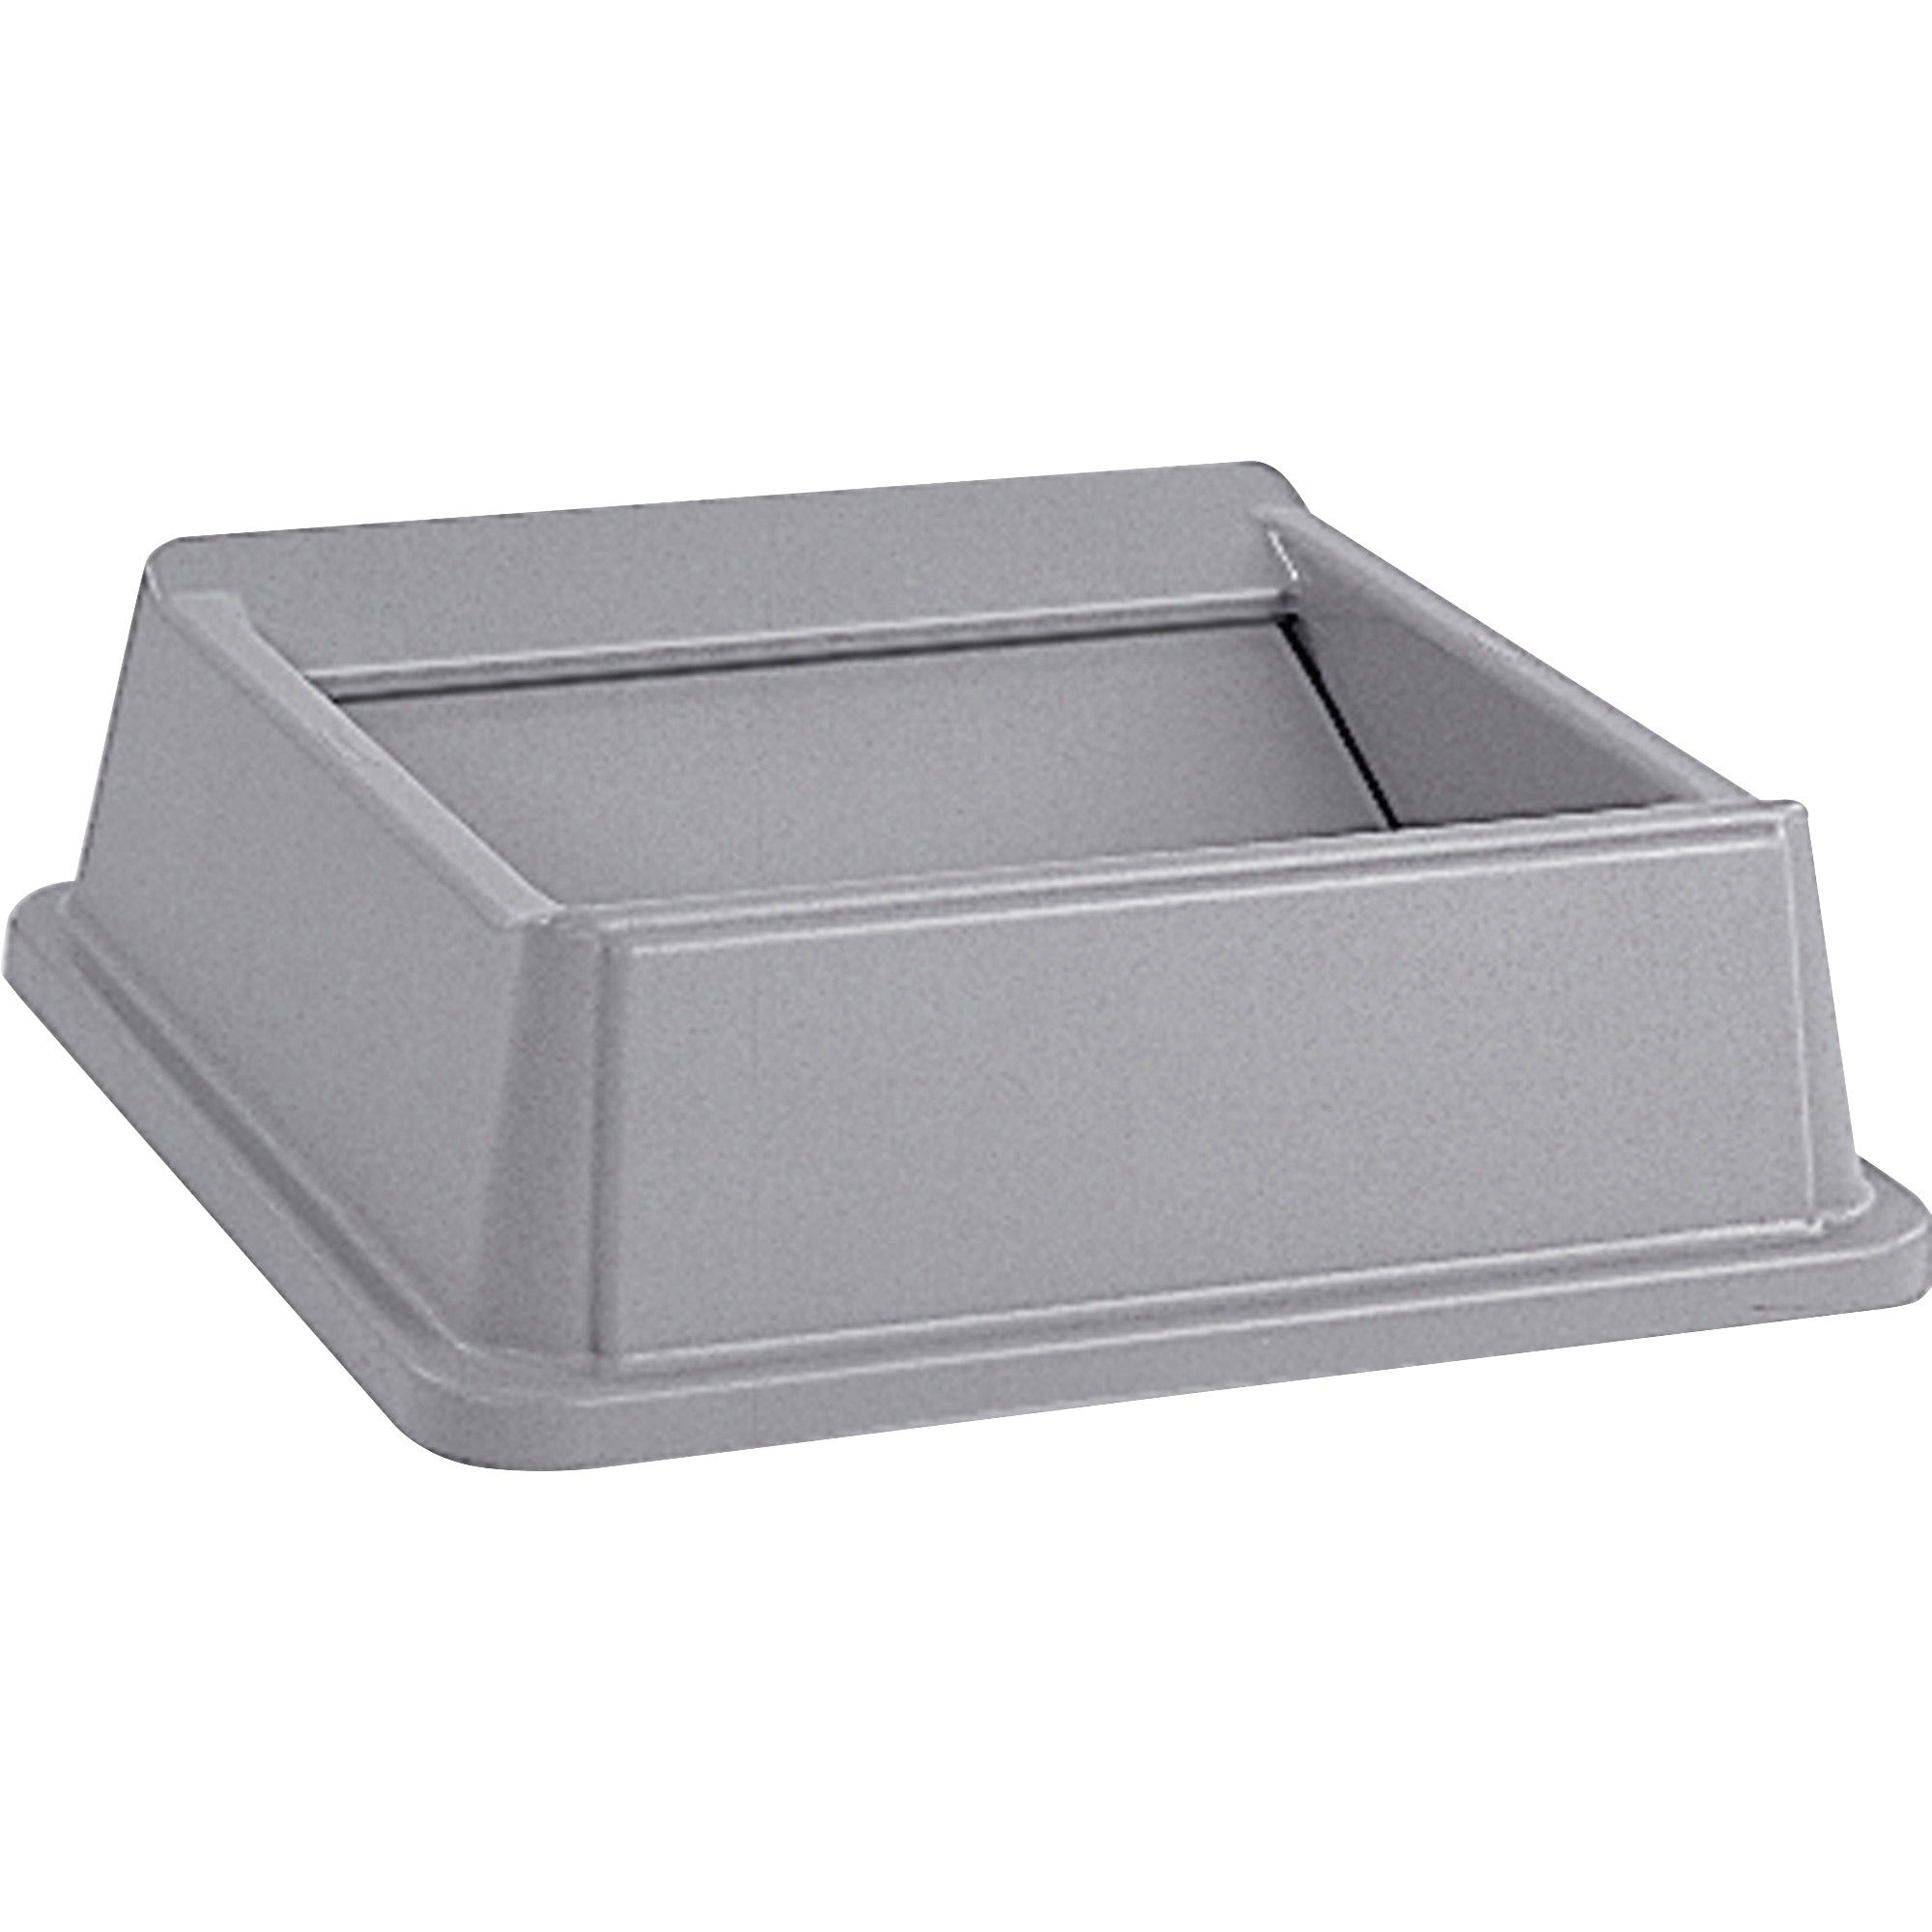 rubbermaid-commercial-untouchable-square-swing-top-square-4-carton-gray_rcp266400gyct - 2